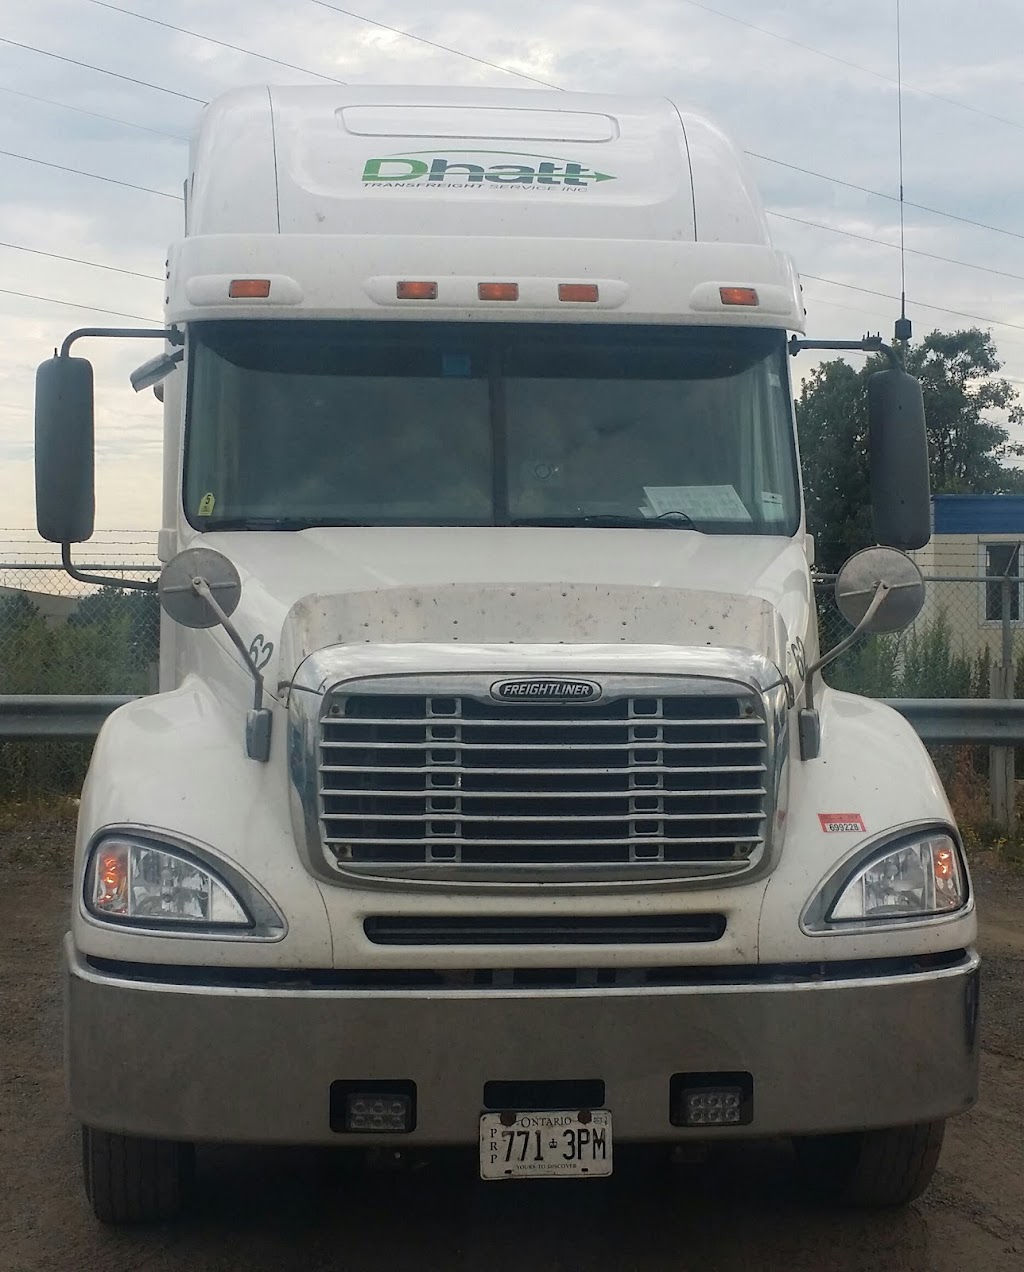 Dhatt Transfreight | 6550 Danville Rd, Mississauga, ON L5T 2S6, Canada | Phone: (905) 564-5700